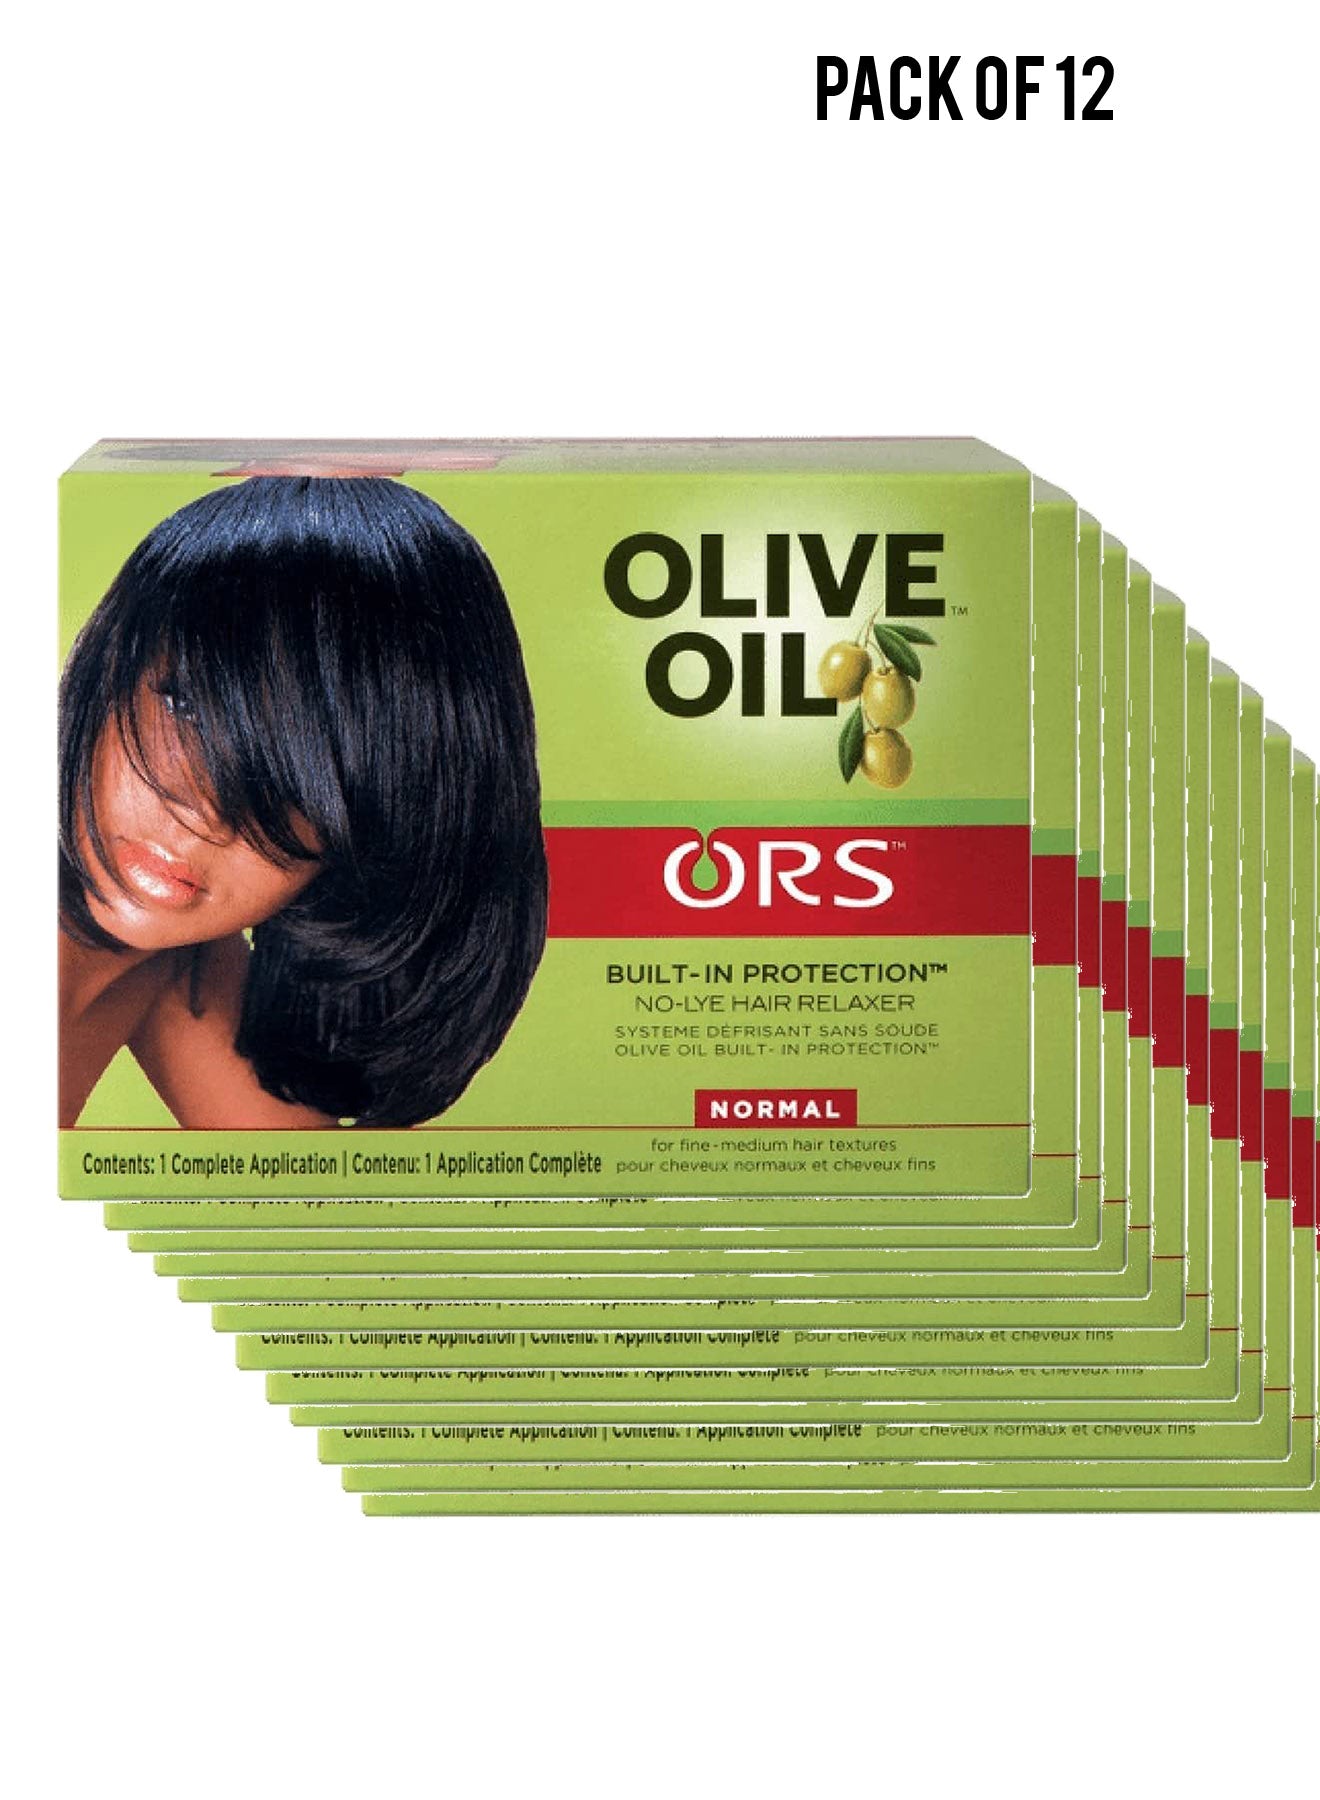 Organic Root Stimulator Olive Oil Nolye Relaxer Normal Kit Value Pack of 12 